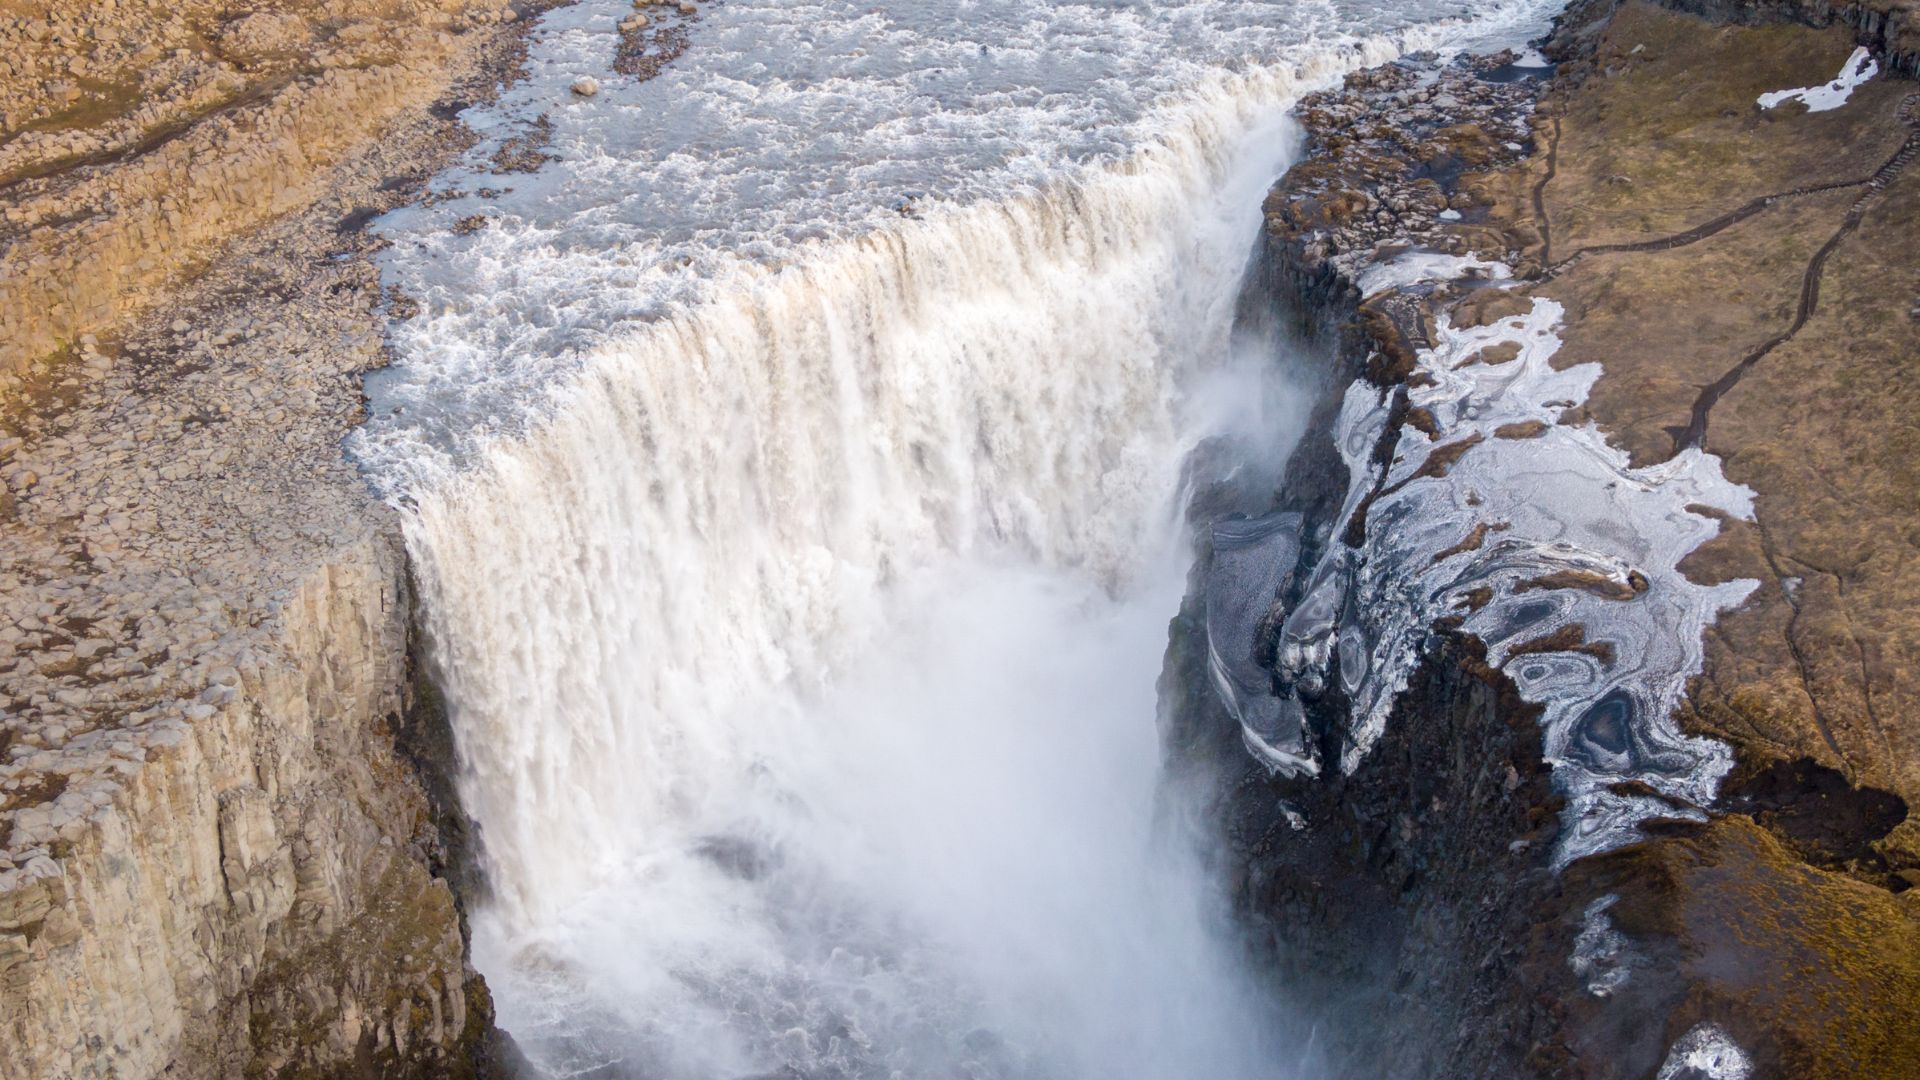 Dettifoss Waterfall is one of the best attractions in North Iceland